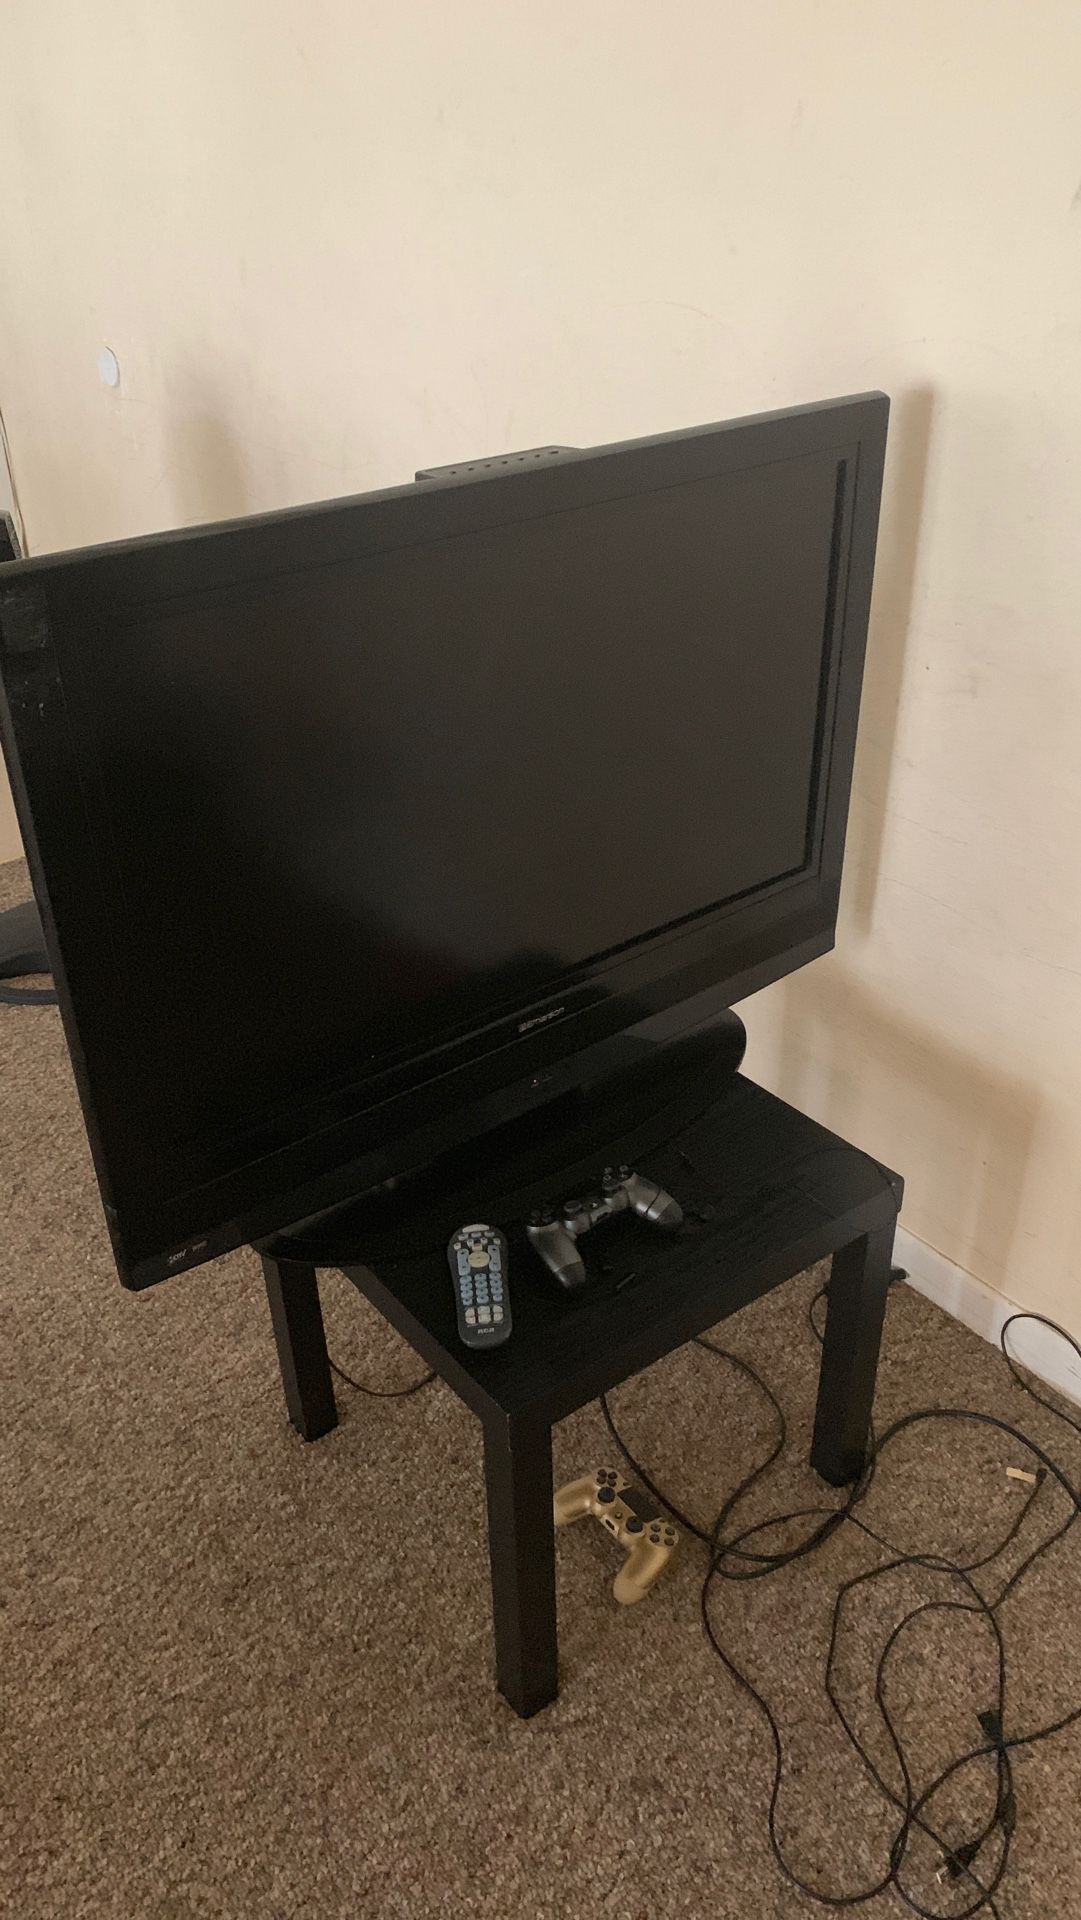 a emerson flat screen don’t no actual size good condition